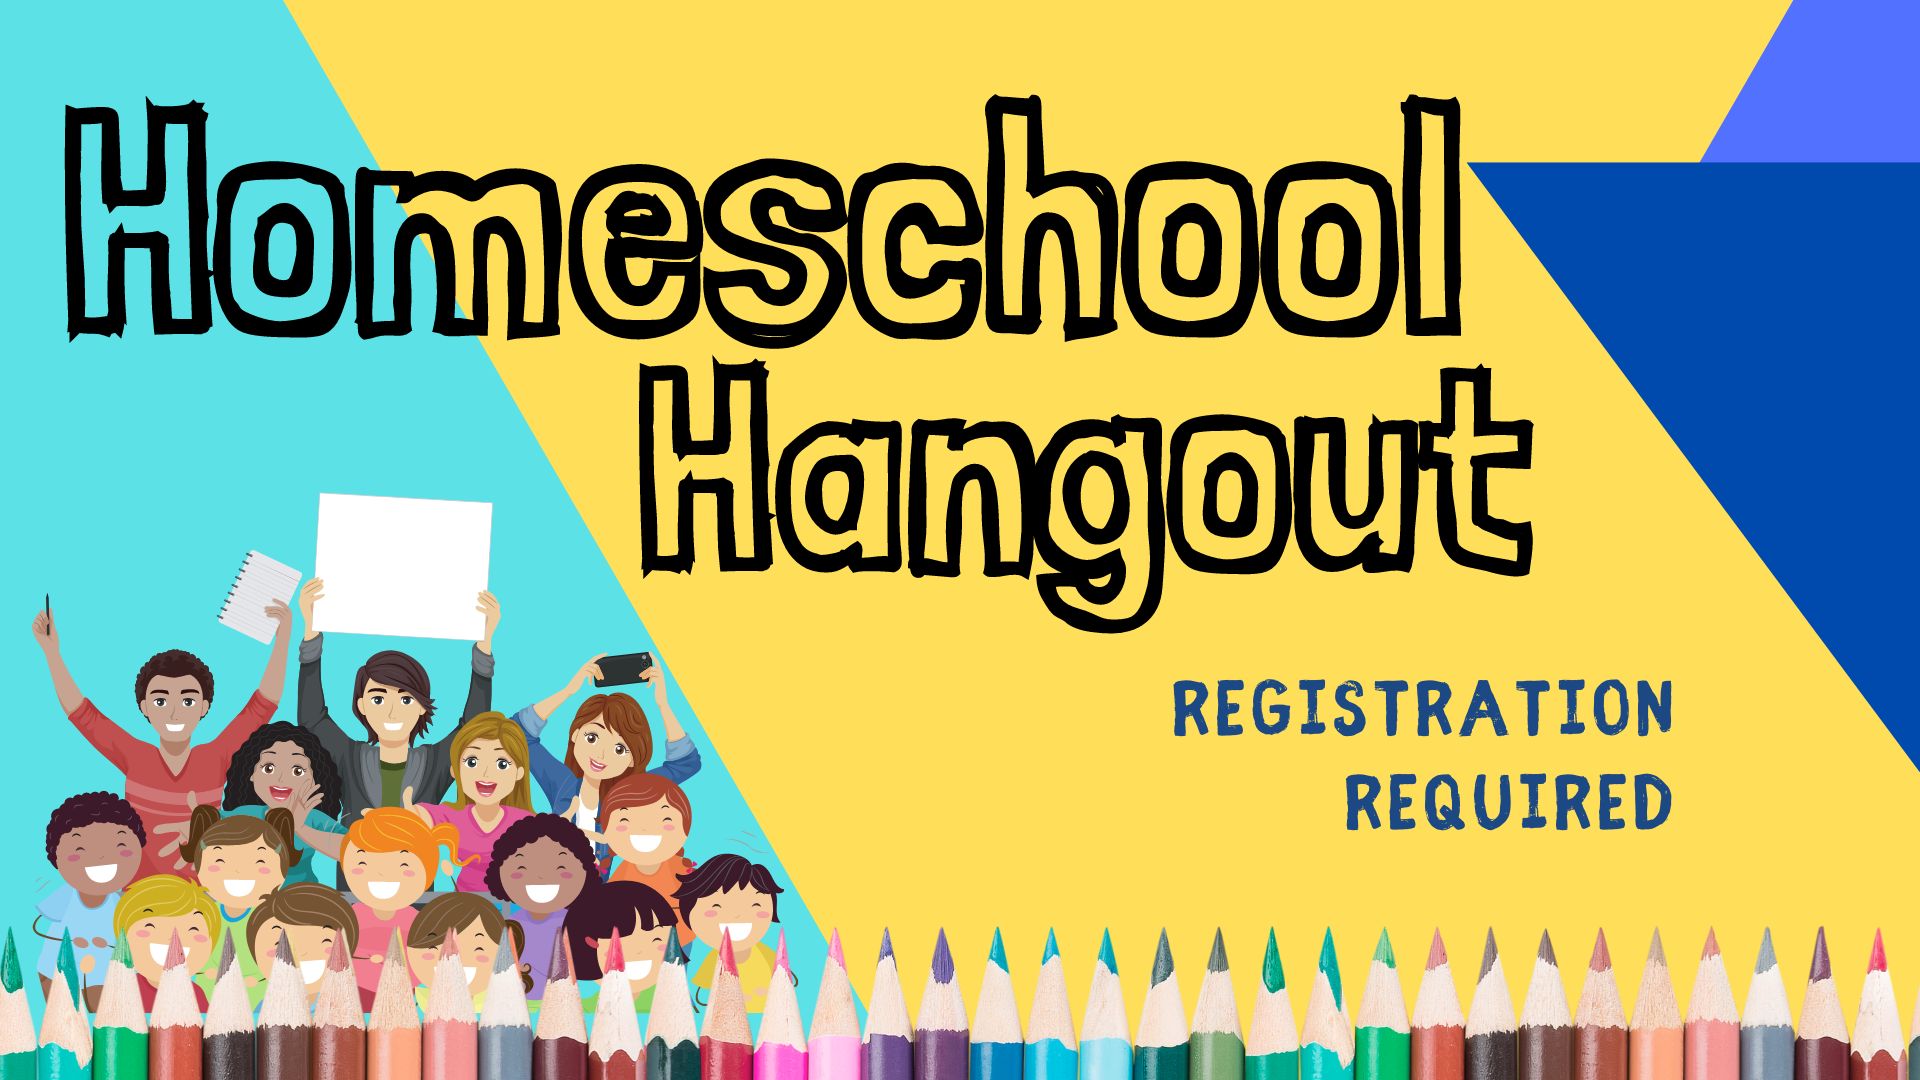 Graphic of a crowd of teens and children cheering, and raising their arms and cheering. Text says Homeschool Hangout. Registration required.